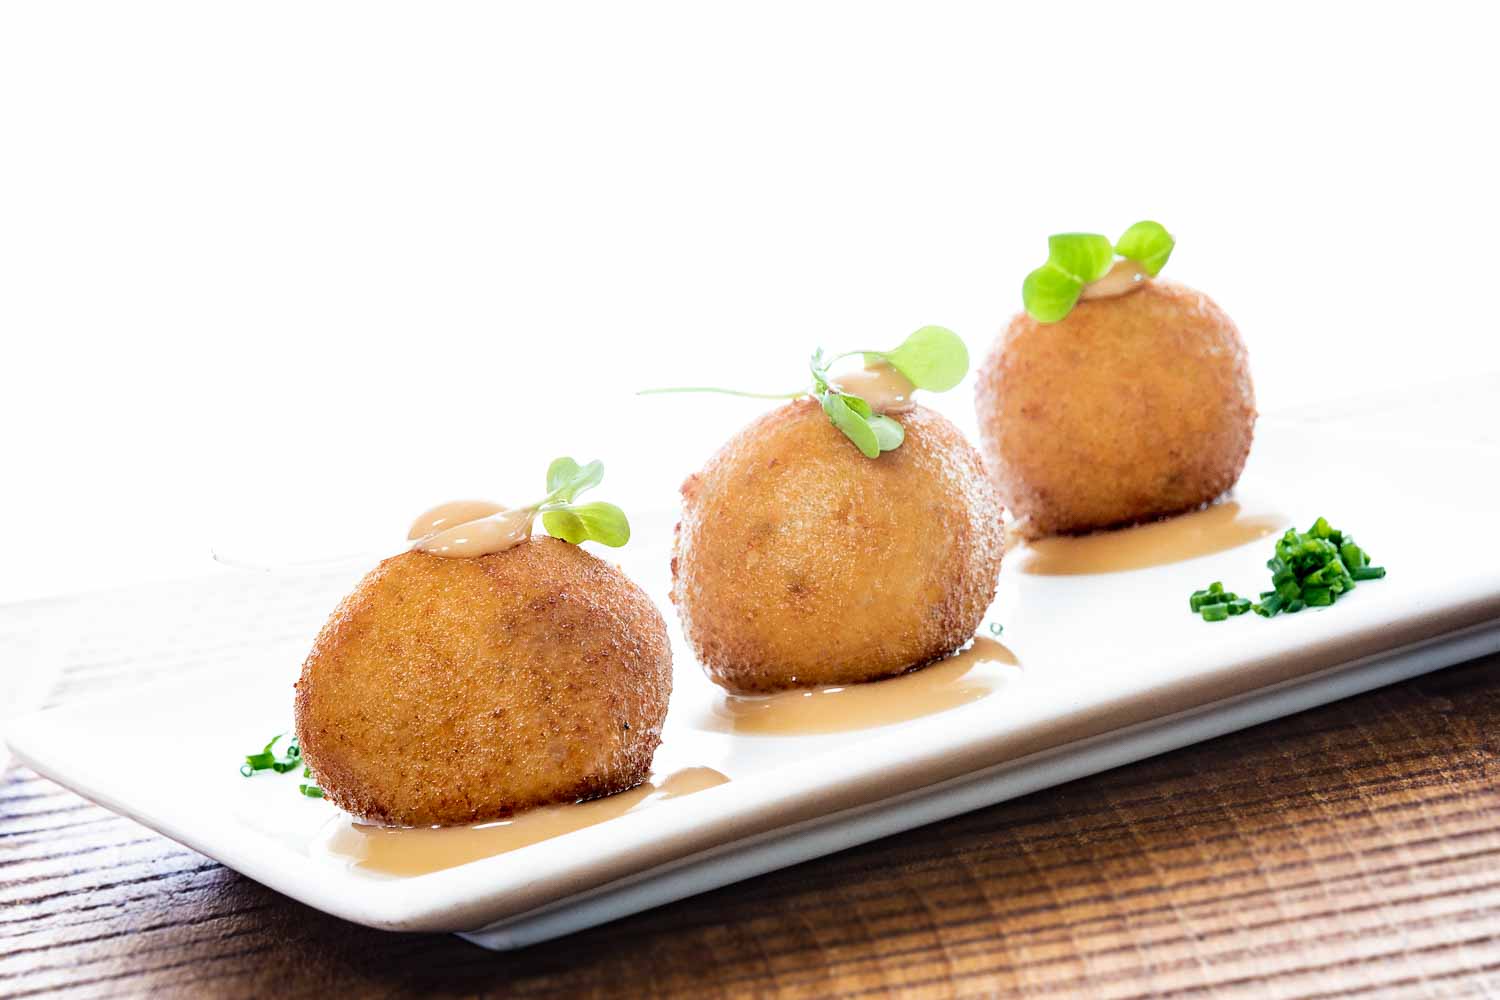 Croquettes from the day